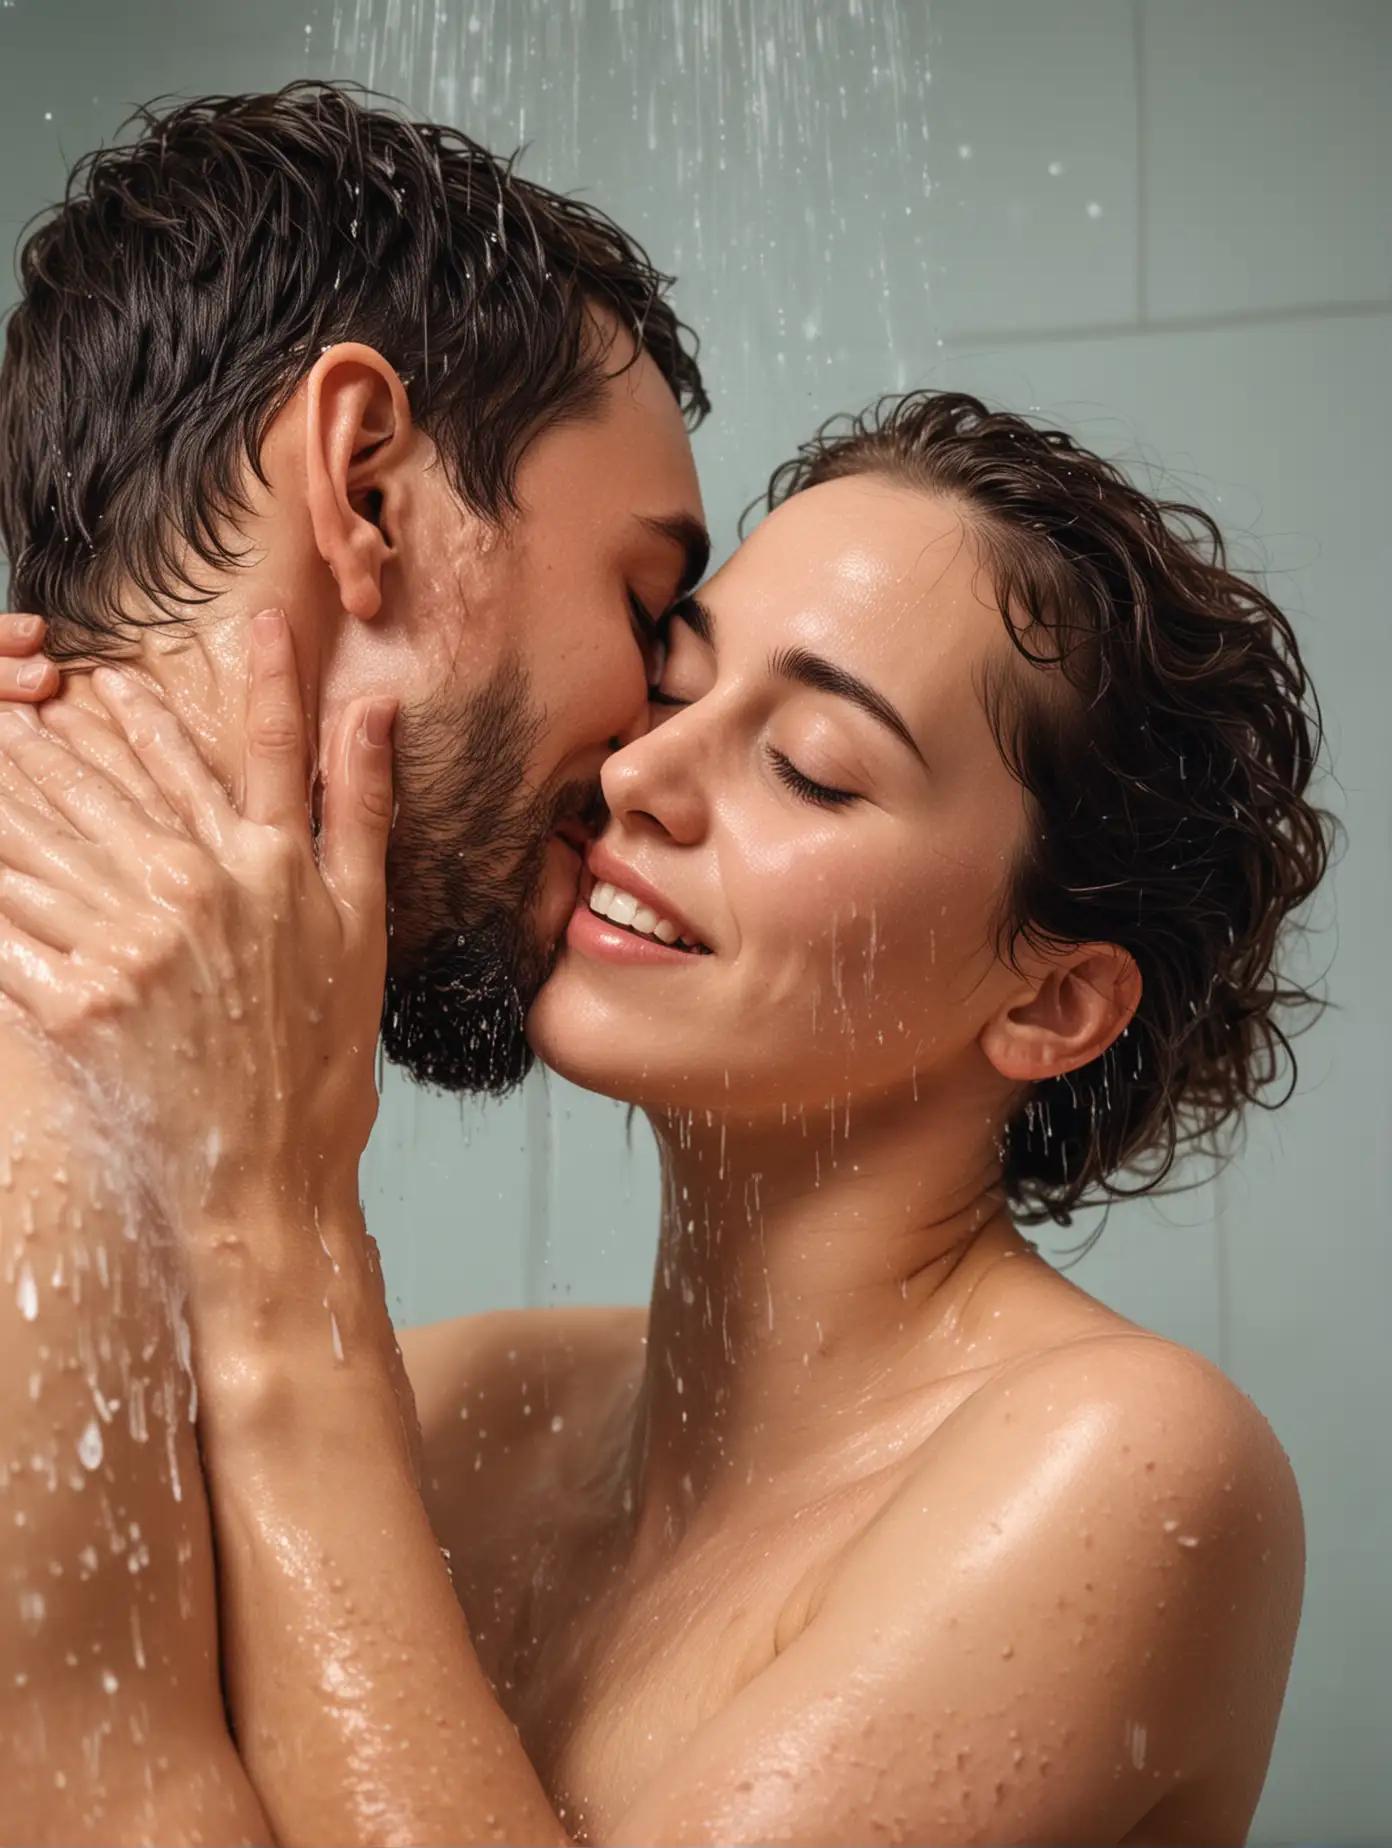 loving couple embracing intimately in the shower, their stress and worries washing away,